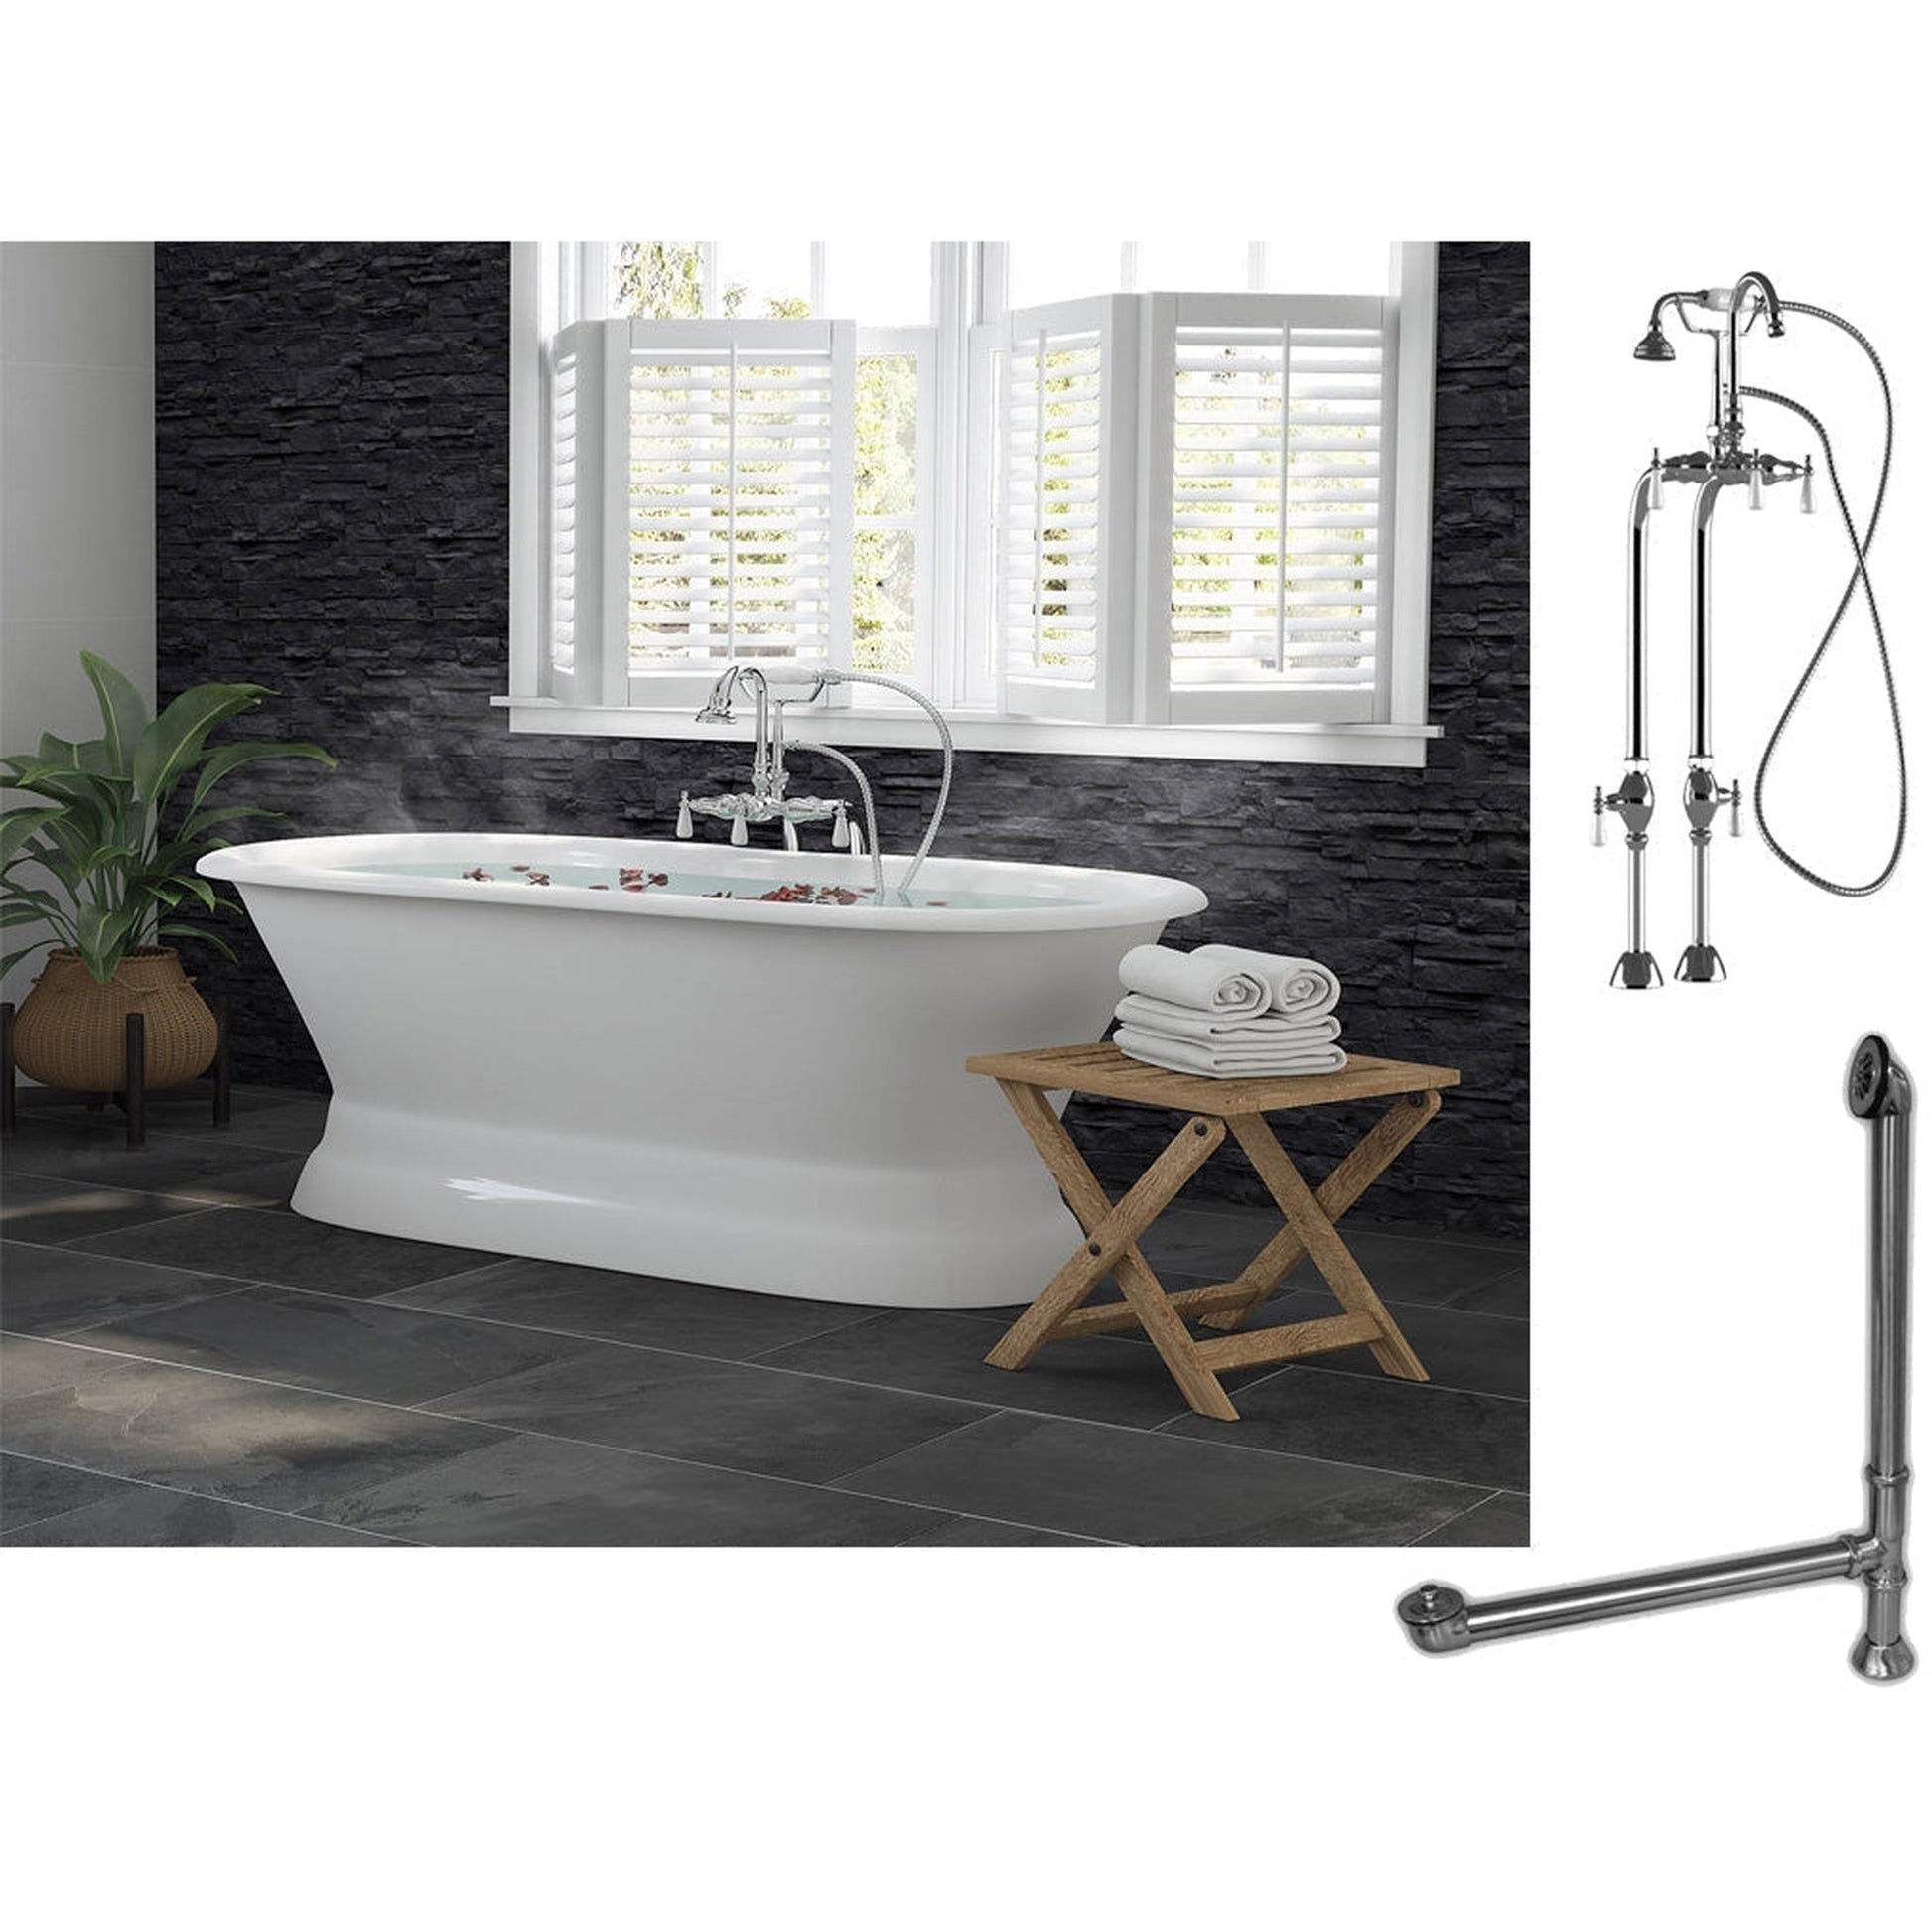 Cambridge Plumbing 60" White Cast Iron Double Ended Pedestal Bathtub With No Deck Holes And Complete Plumbing Package Including Freestanding English Telephone Gooseneck Faucet, Drain And Overflow Assembly In Polished Chrome